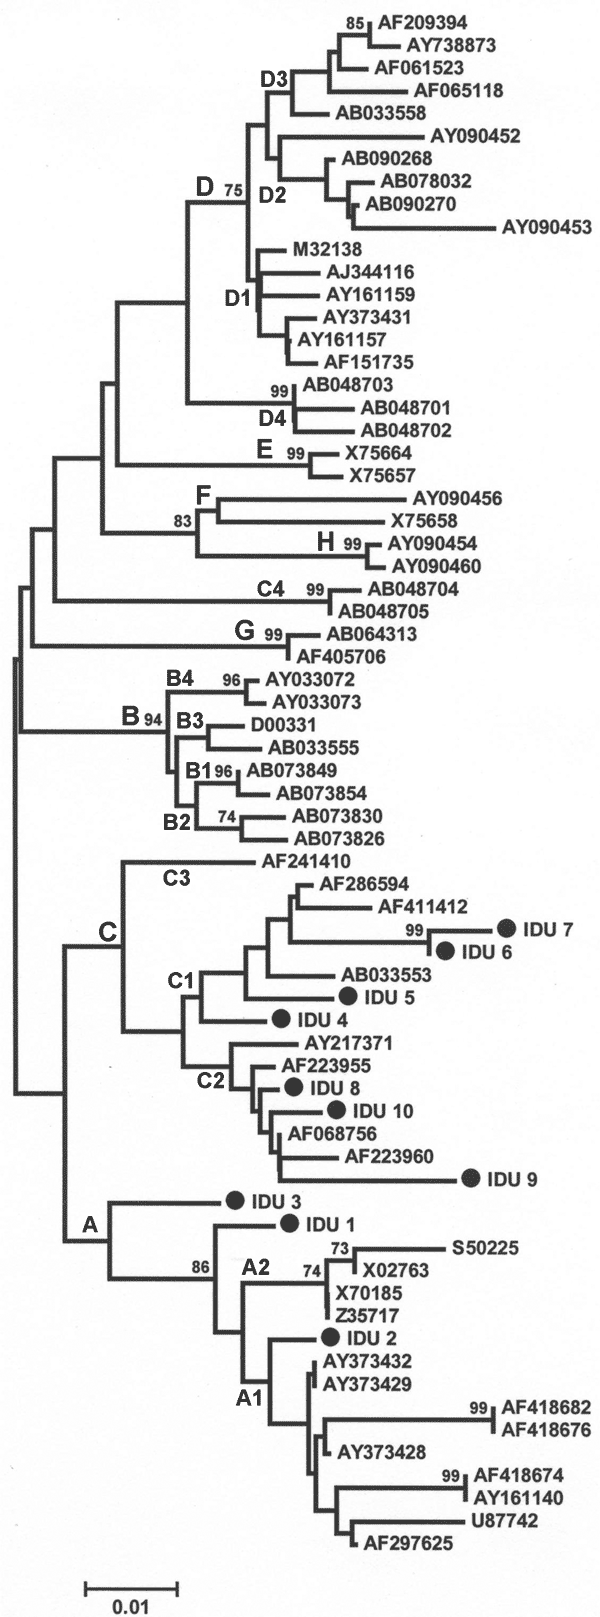 Phylogenetic relationships among the sequences of s gene from hepatitis B virus strains isolated in this study (shown with prefix "IDU") compared with reference sequences from GenBank (accession nos. are shown). Genotype and subgenotypes are indicated at each main branch and subbranch, respectively. Percentage of bootstrap replications supporting the clusters (&gt;75%) are also shown at the nodes.